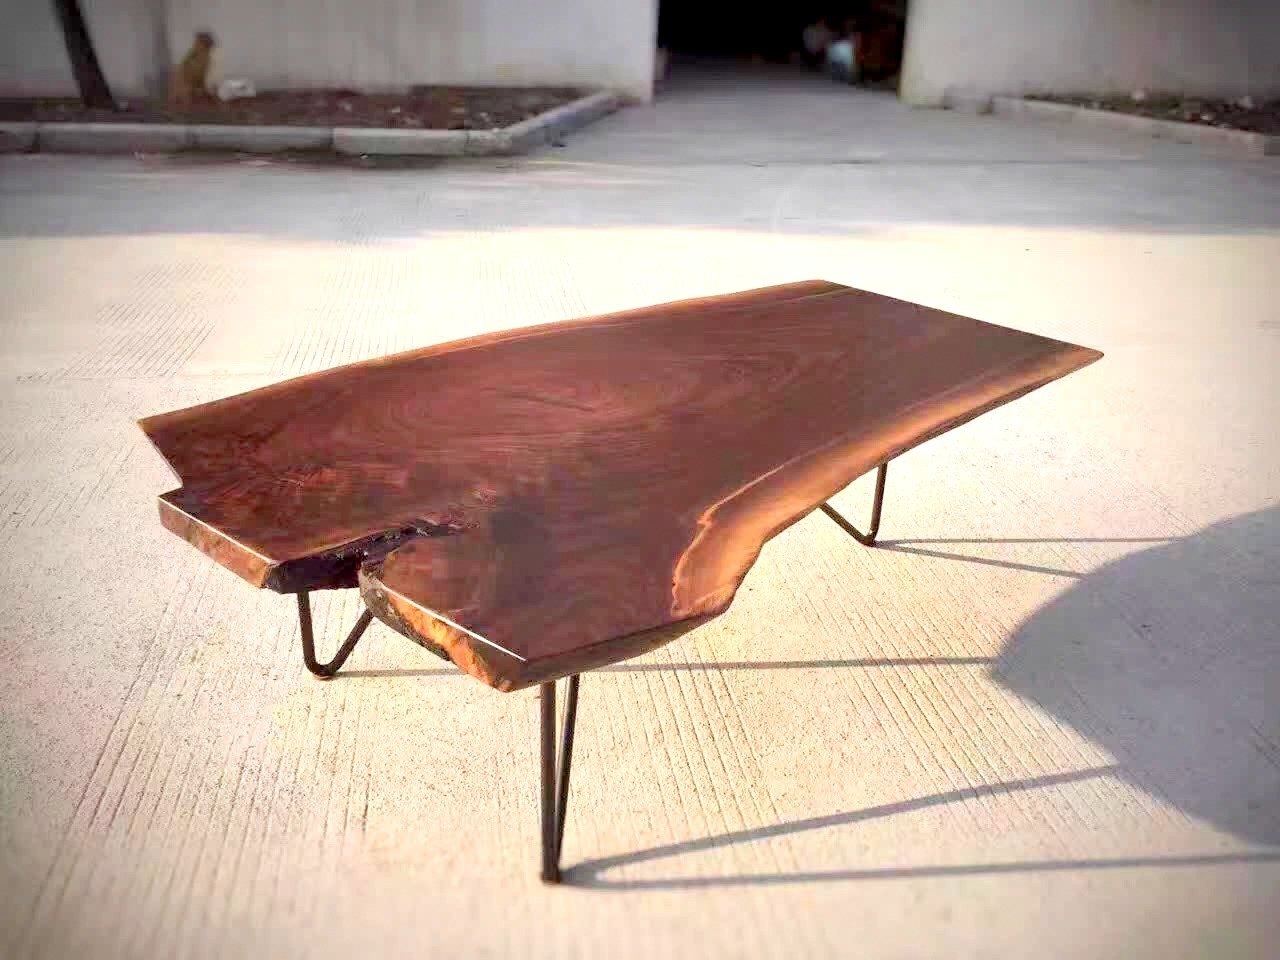 Natural edge walnut wane slab table top with hairpin